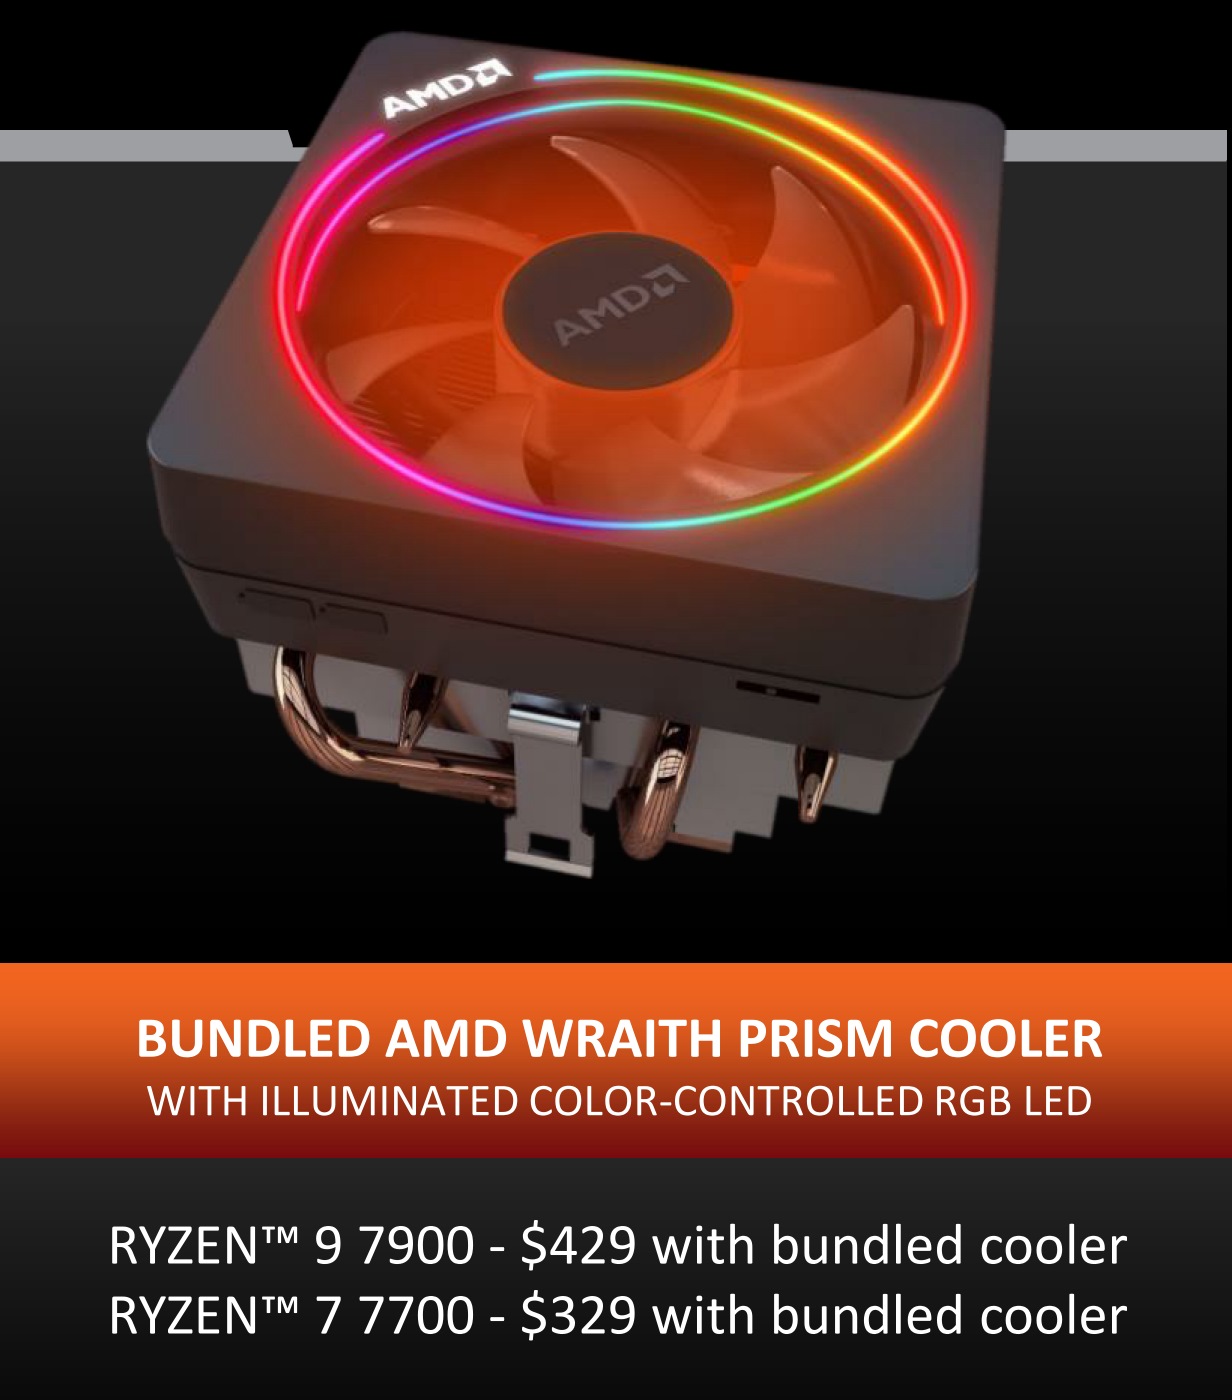 The Ryzen 7 7700 and Ryzen 9 7900 boxed versions will come with a Wraith Prism cooler with RGB lighting.